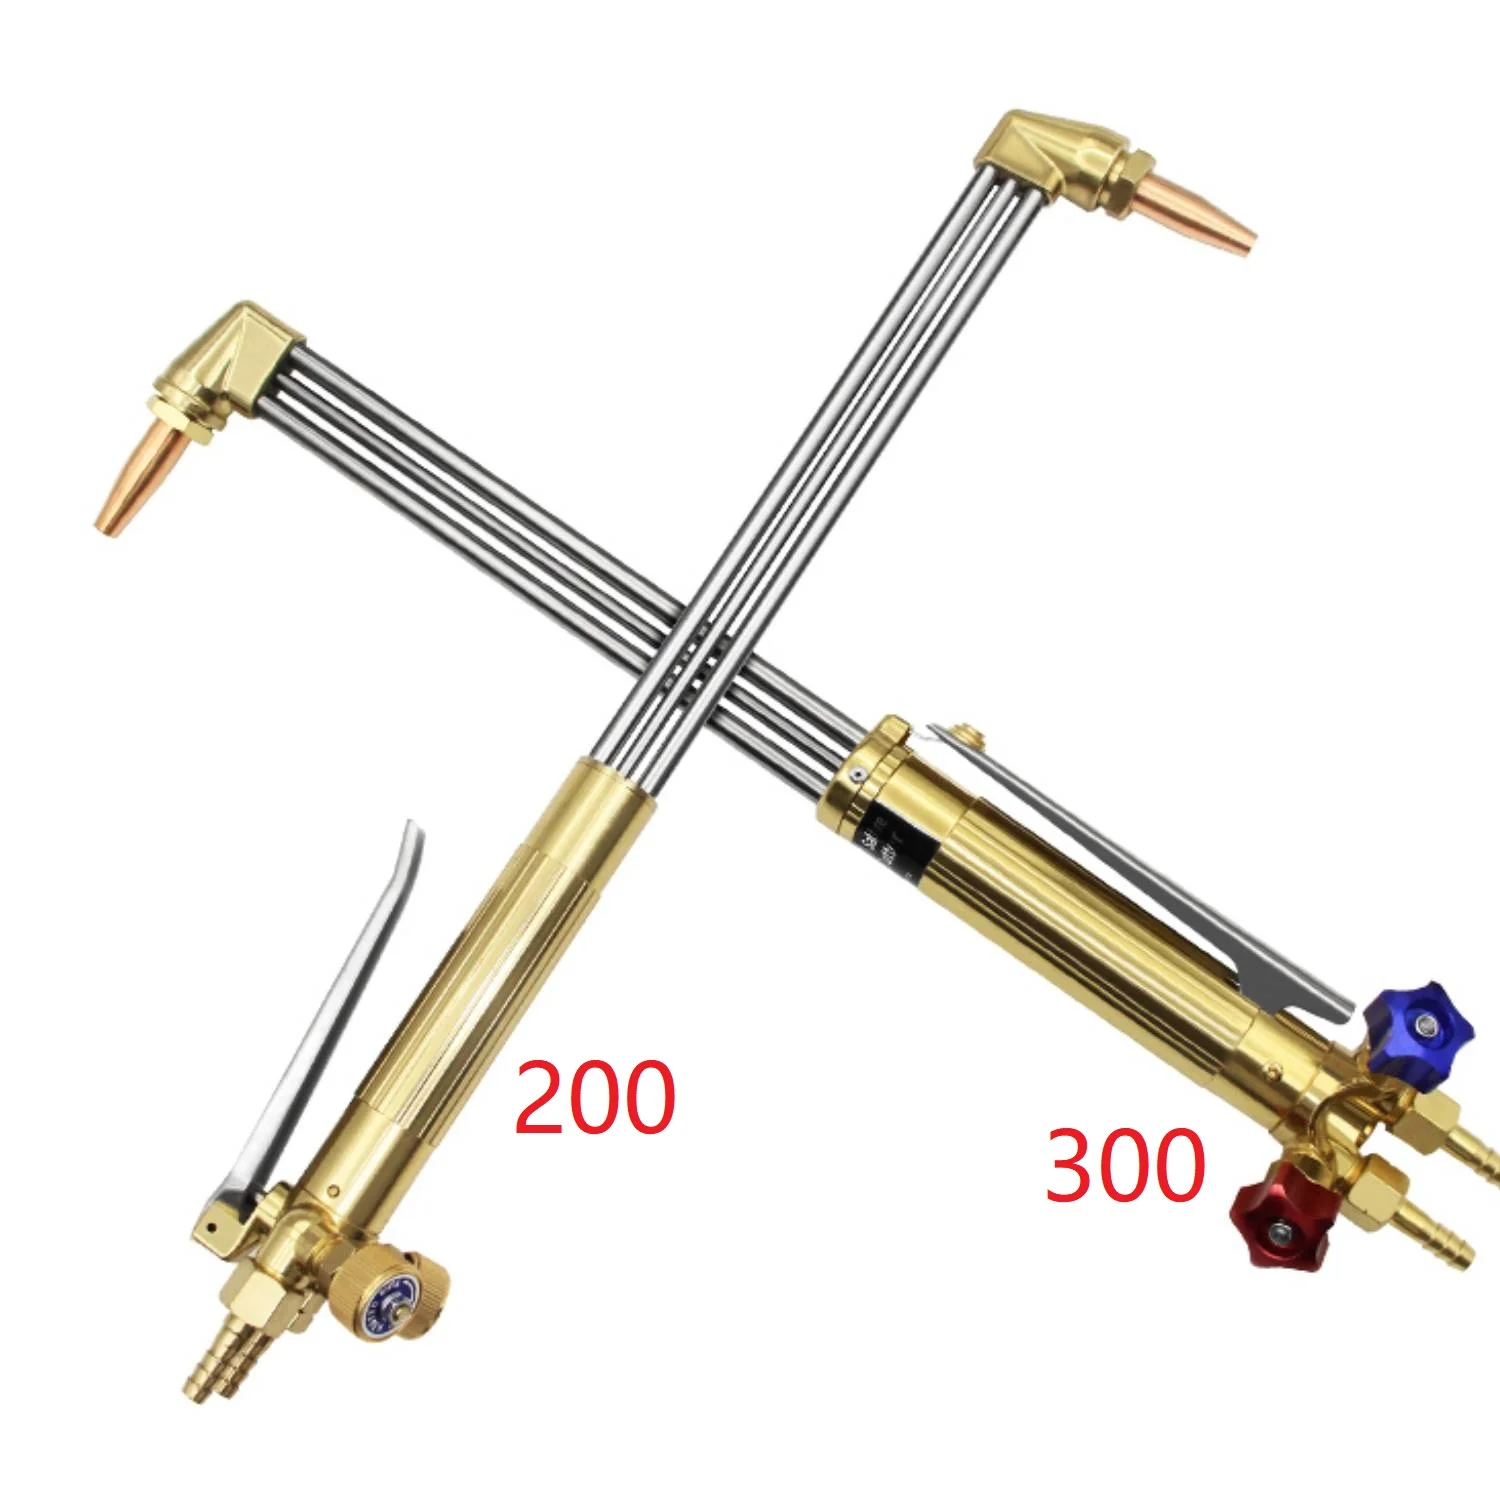 

Not Include Cutting Tip 1 Piece 200 or 300 ANME PNME Propane Acetylene Equal Pressure Flame Gas Cutting Torch